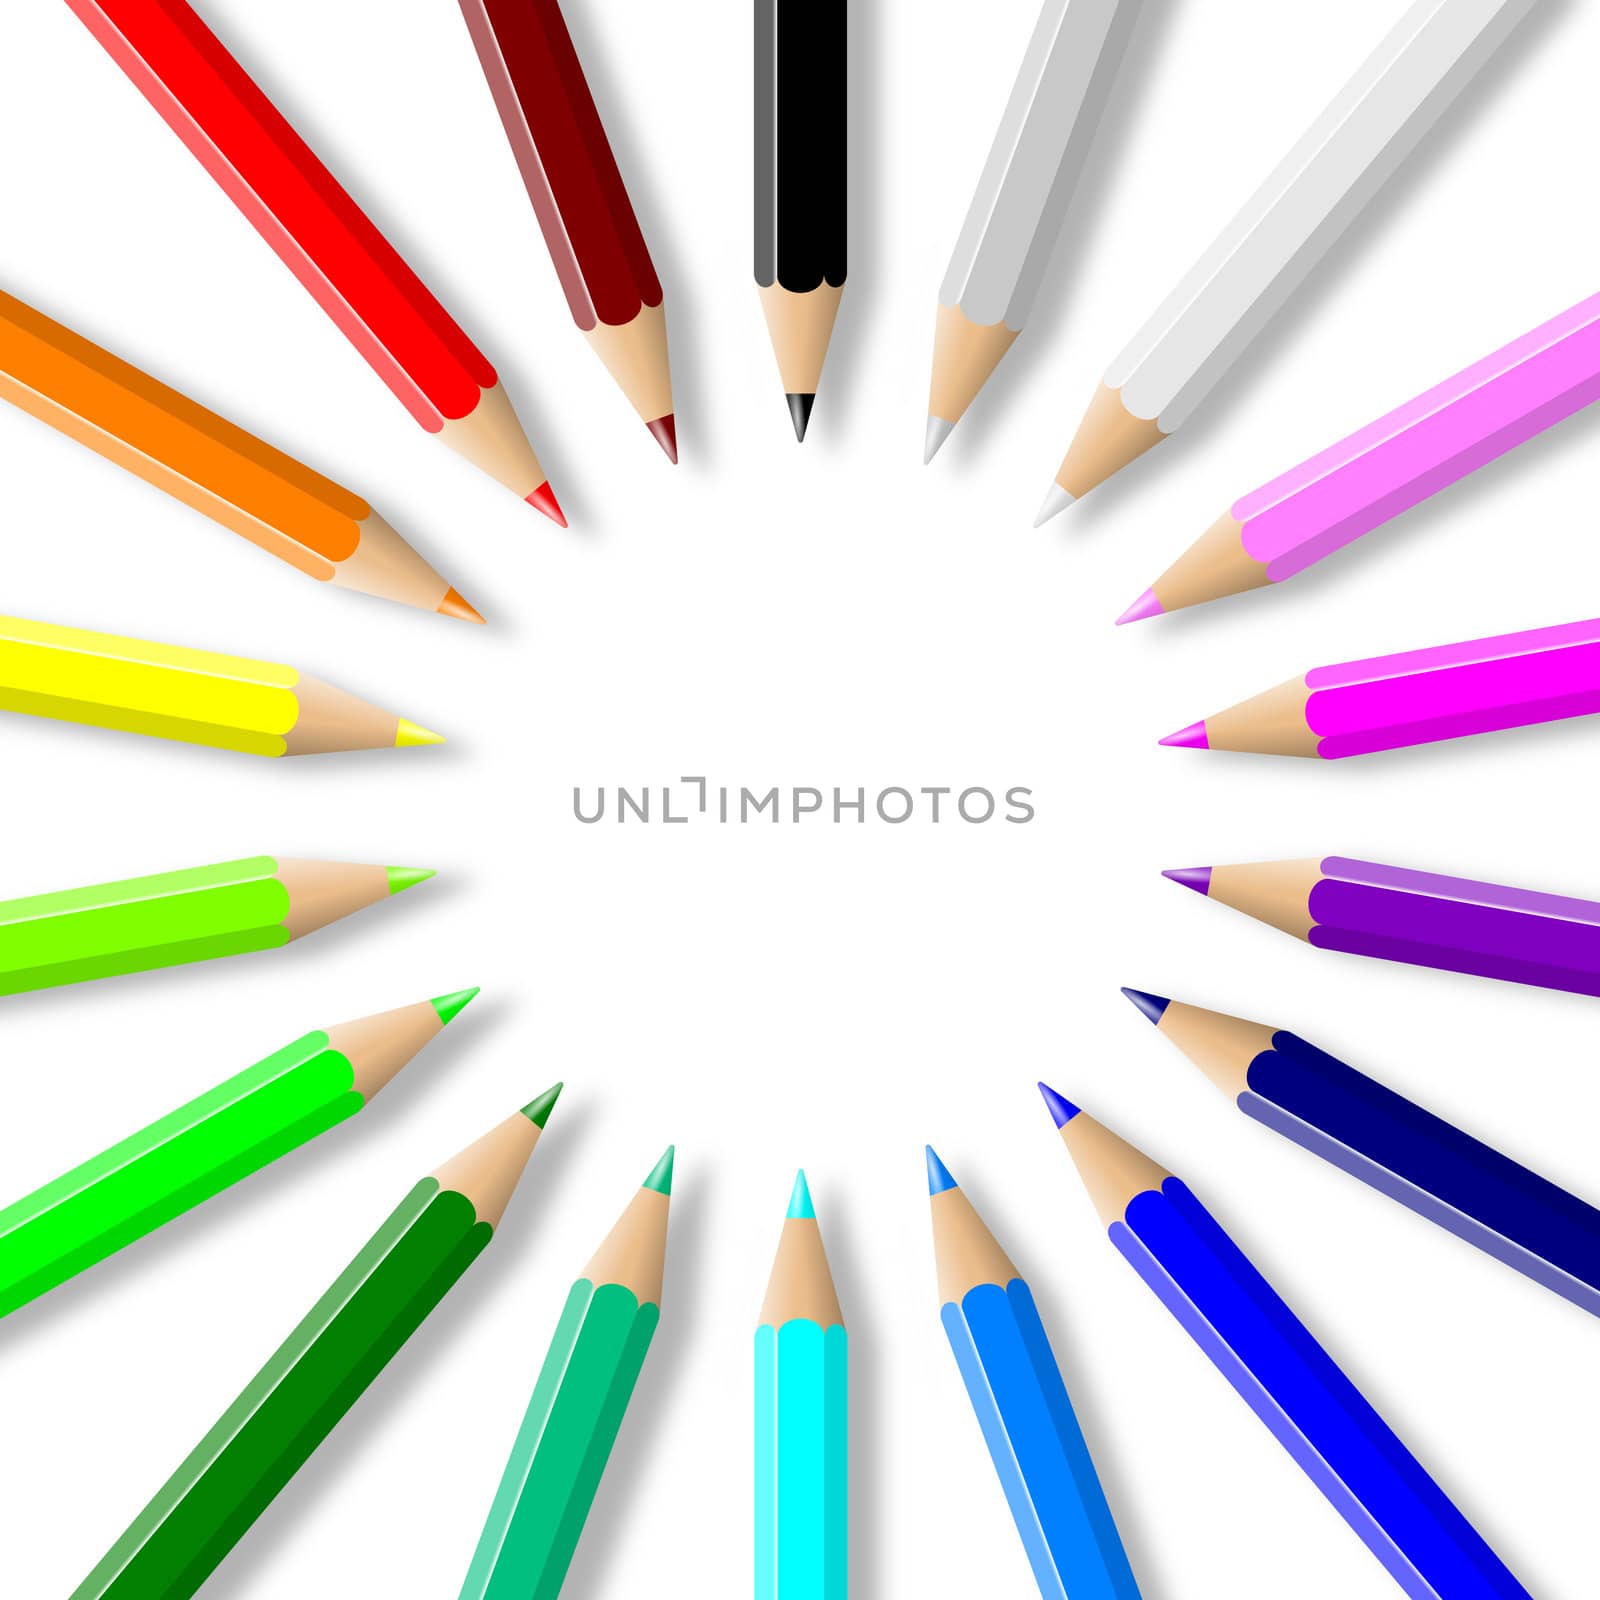 Rainbow of colorful wood pencils arranged in circle on empty white background illustration